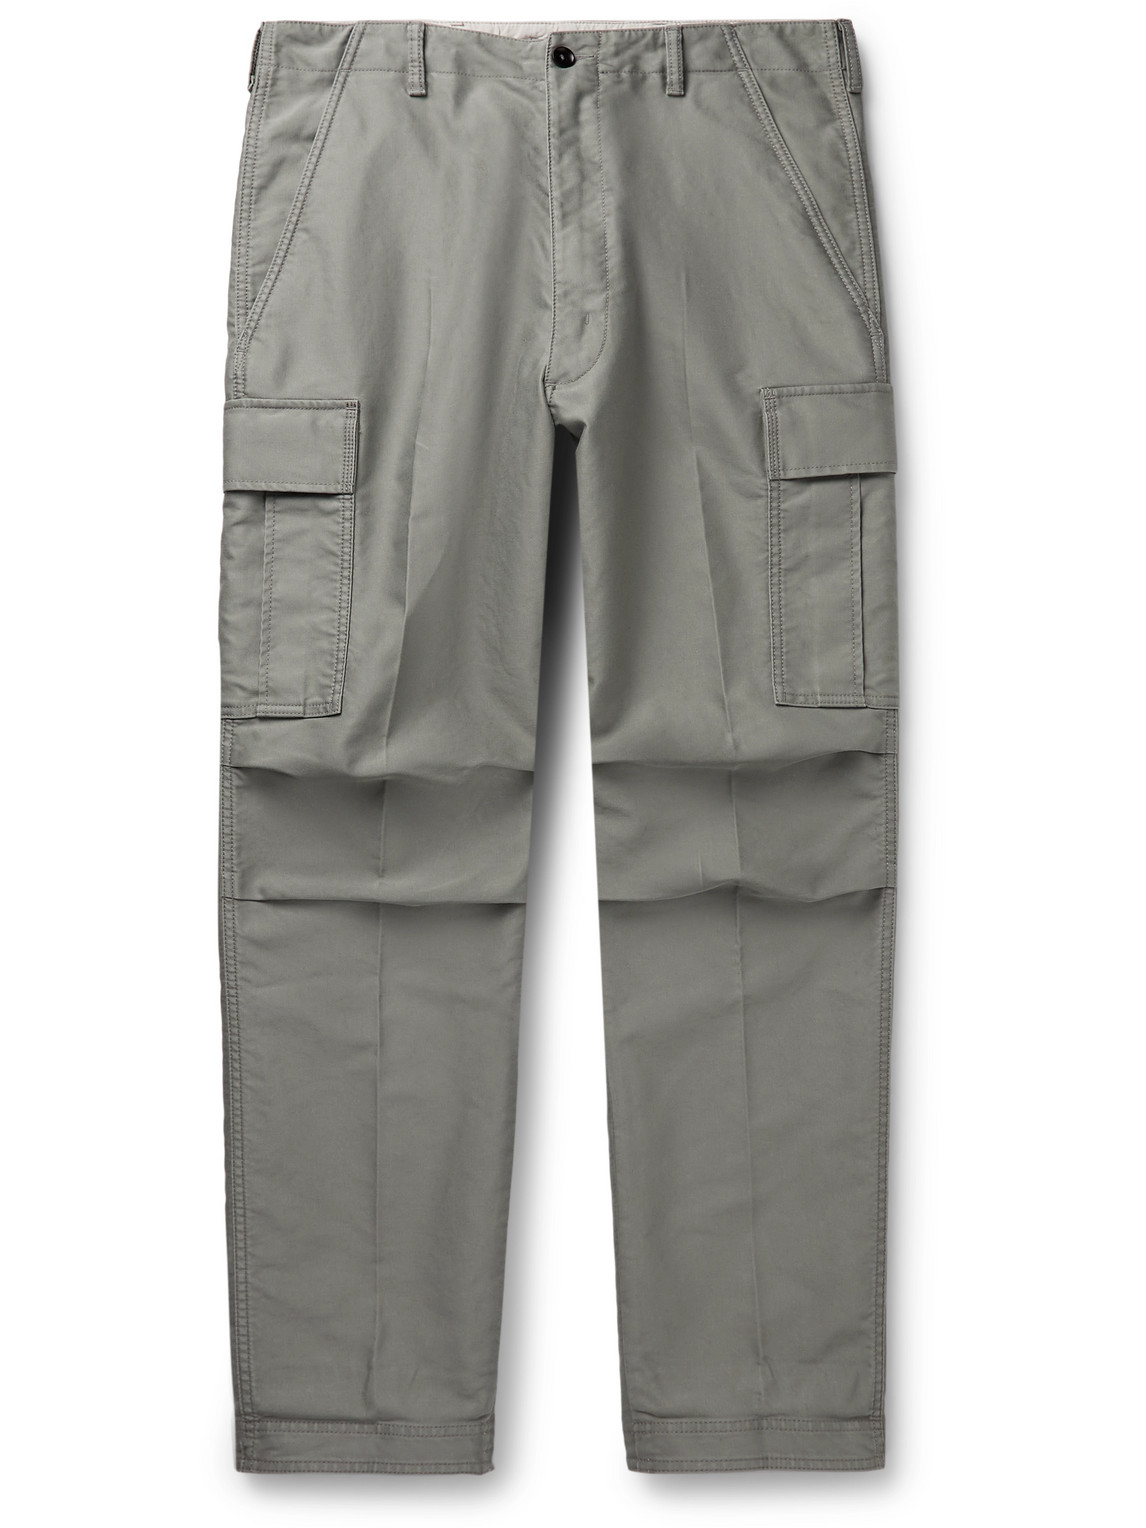 TOM FORD STRAIGHT-LEG COTTON CARGO TROUSERS